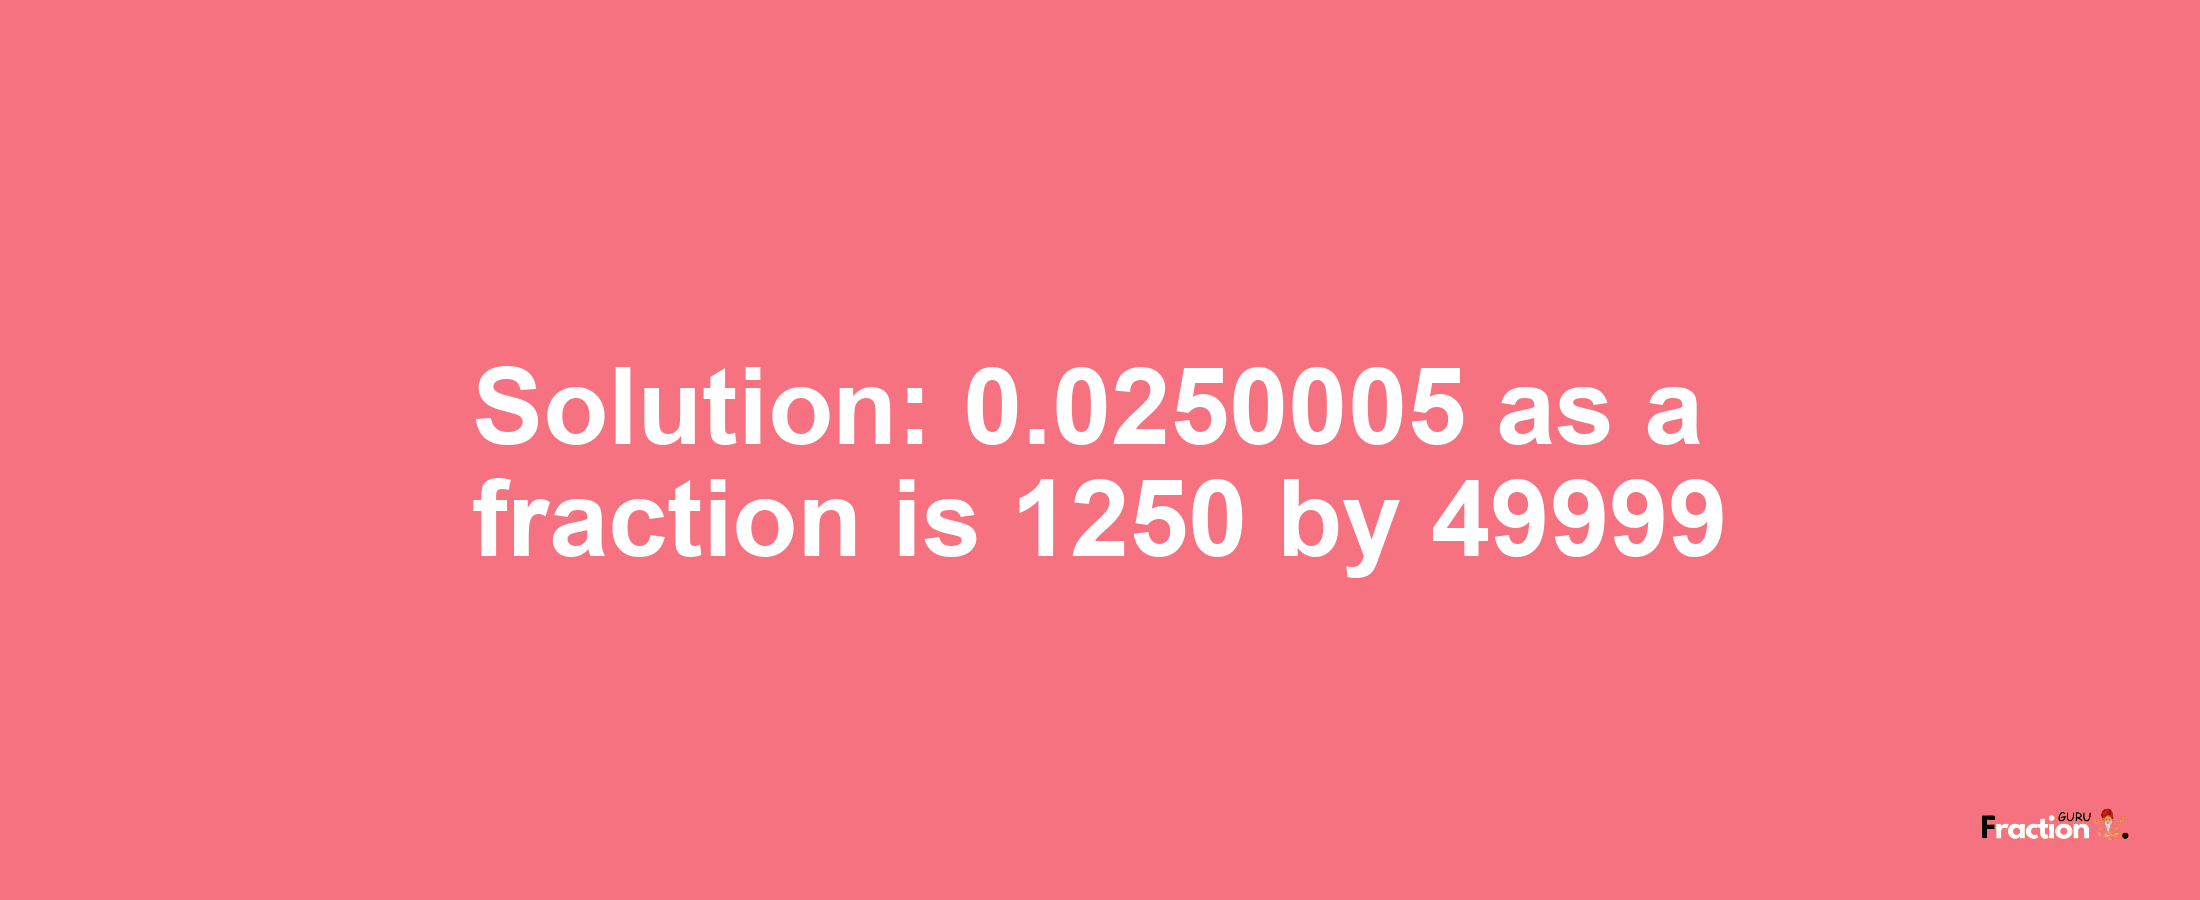 Solution:0.0250005 as a fraction is 1250/49999